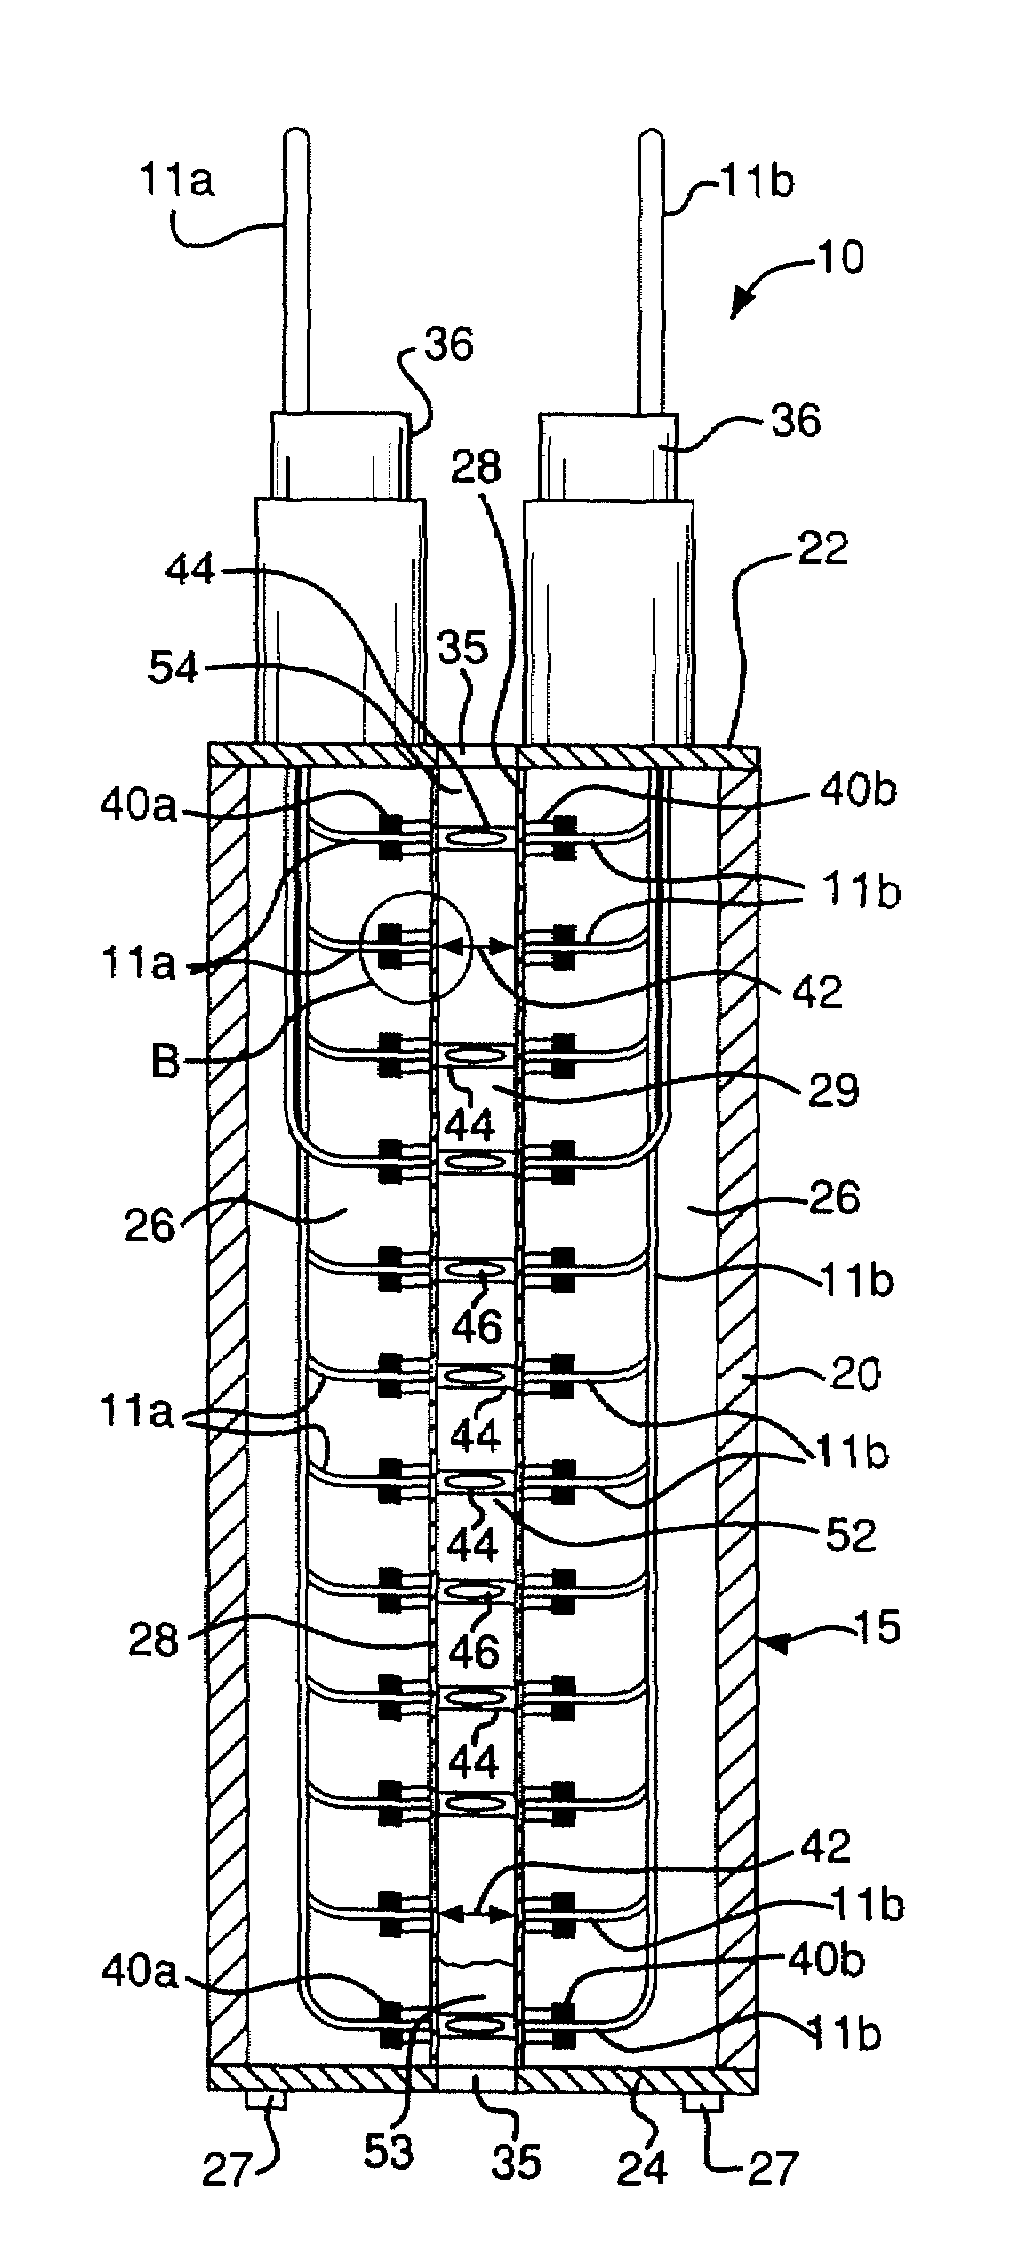 Systems and methods for determining level and/or type of a fluid